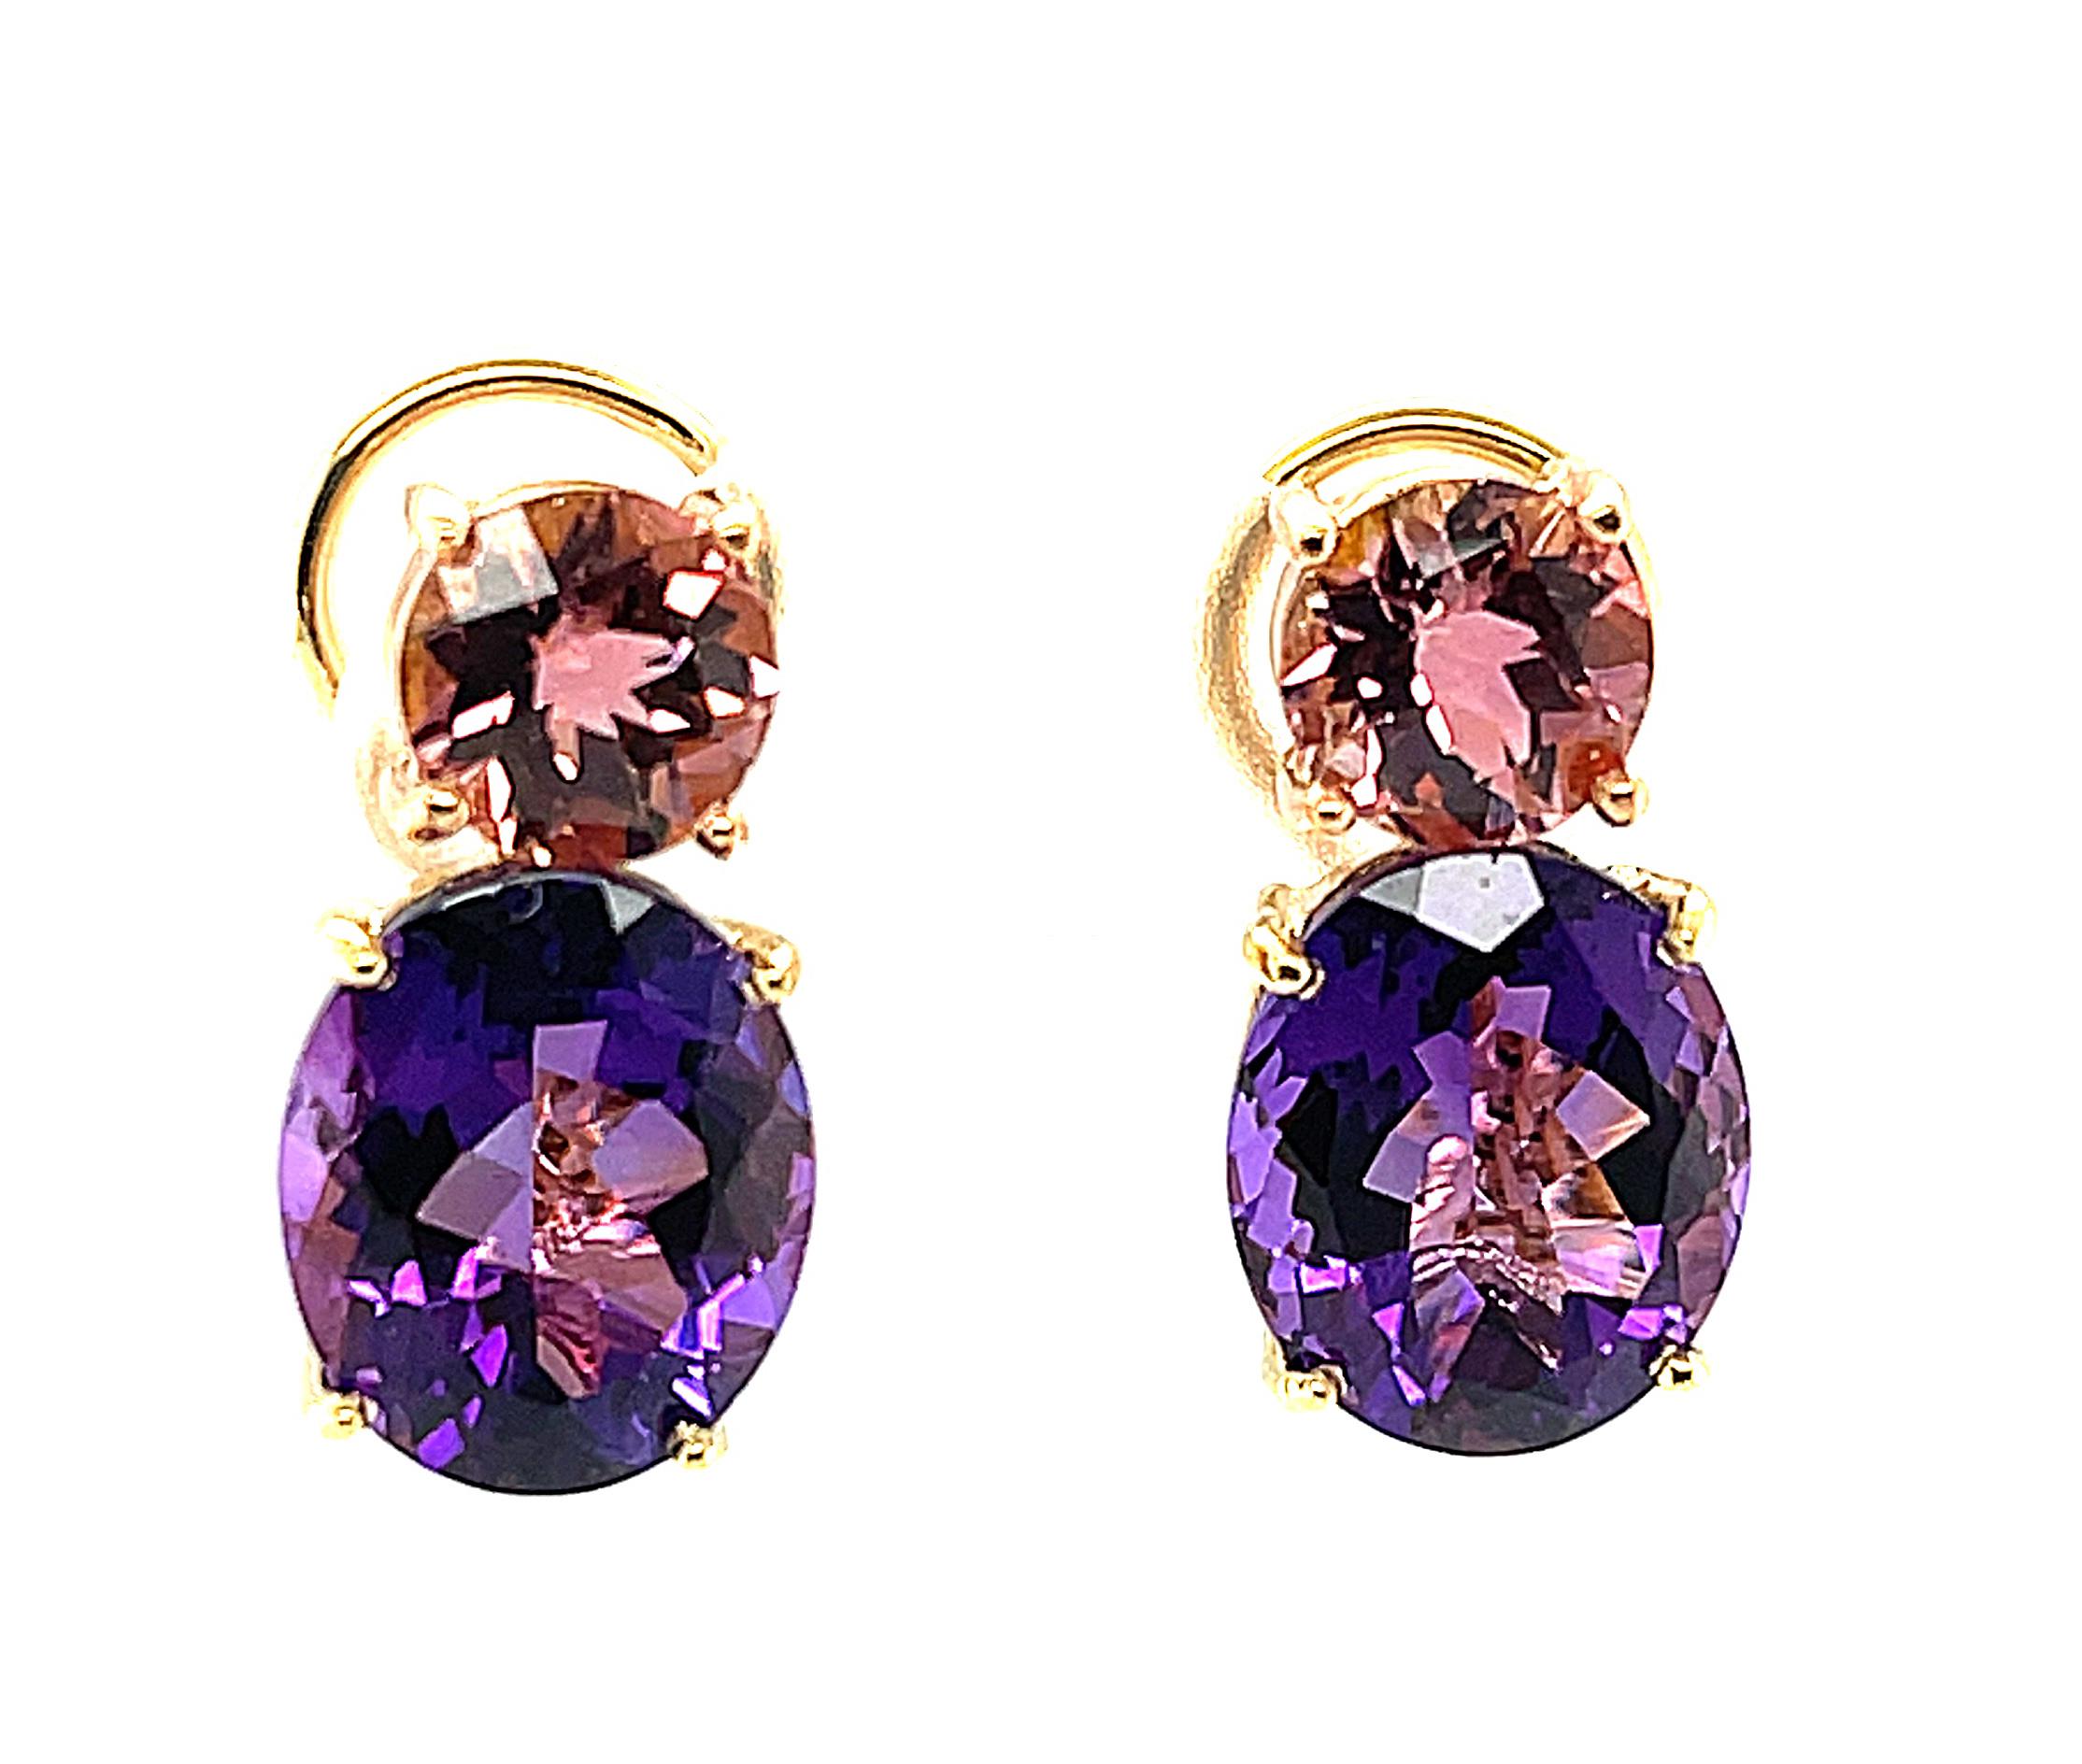 These stunning color blocked earrings feature rosy-pink tourmaline rounds paired with deep purple amethysts ovals. They were handmade in 18k rose and yellow gold by our Master Jewelers in Los Angeles and have French clip backings which make them sit